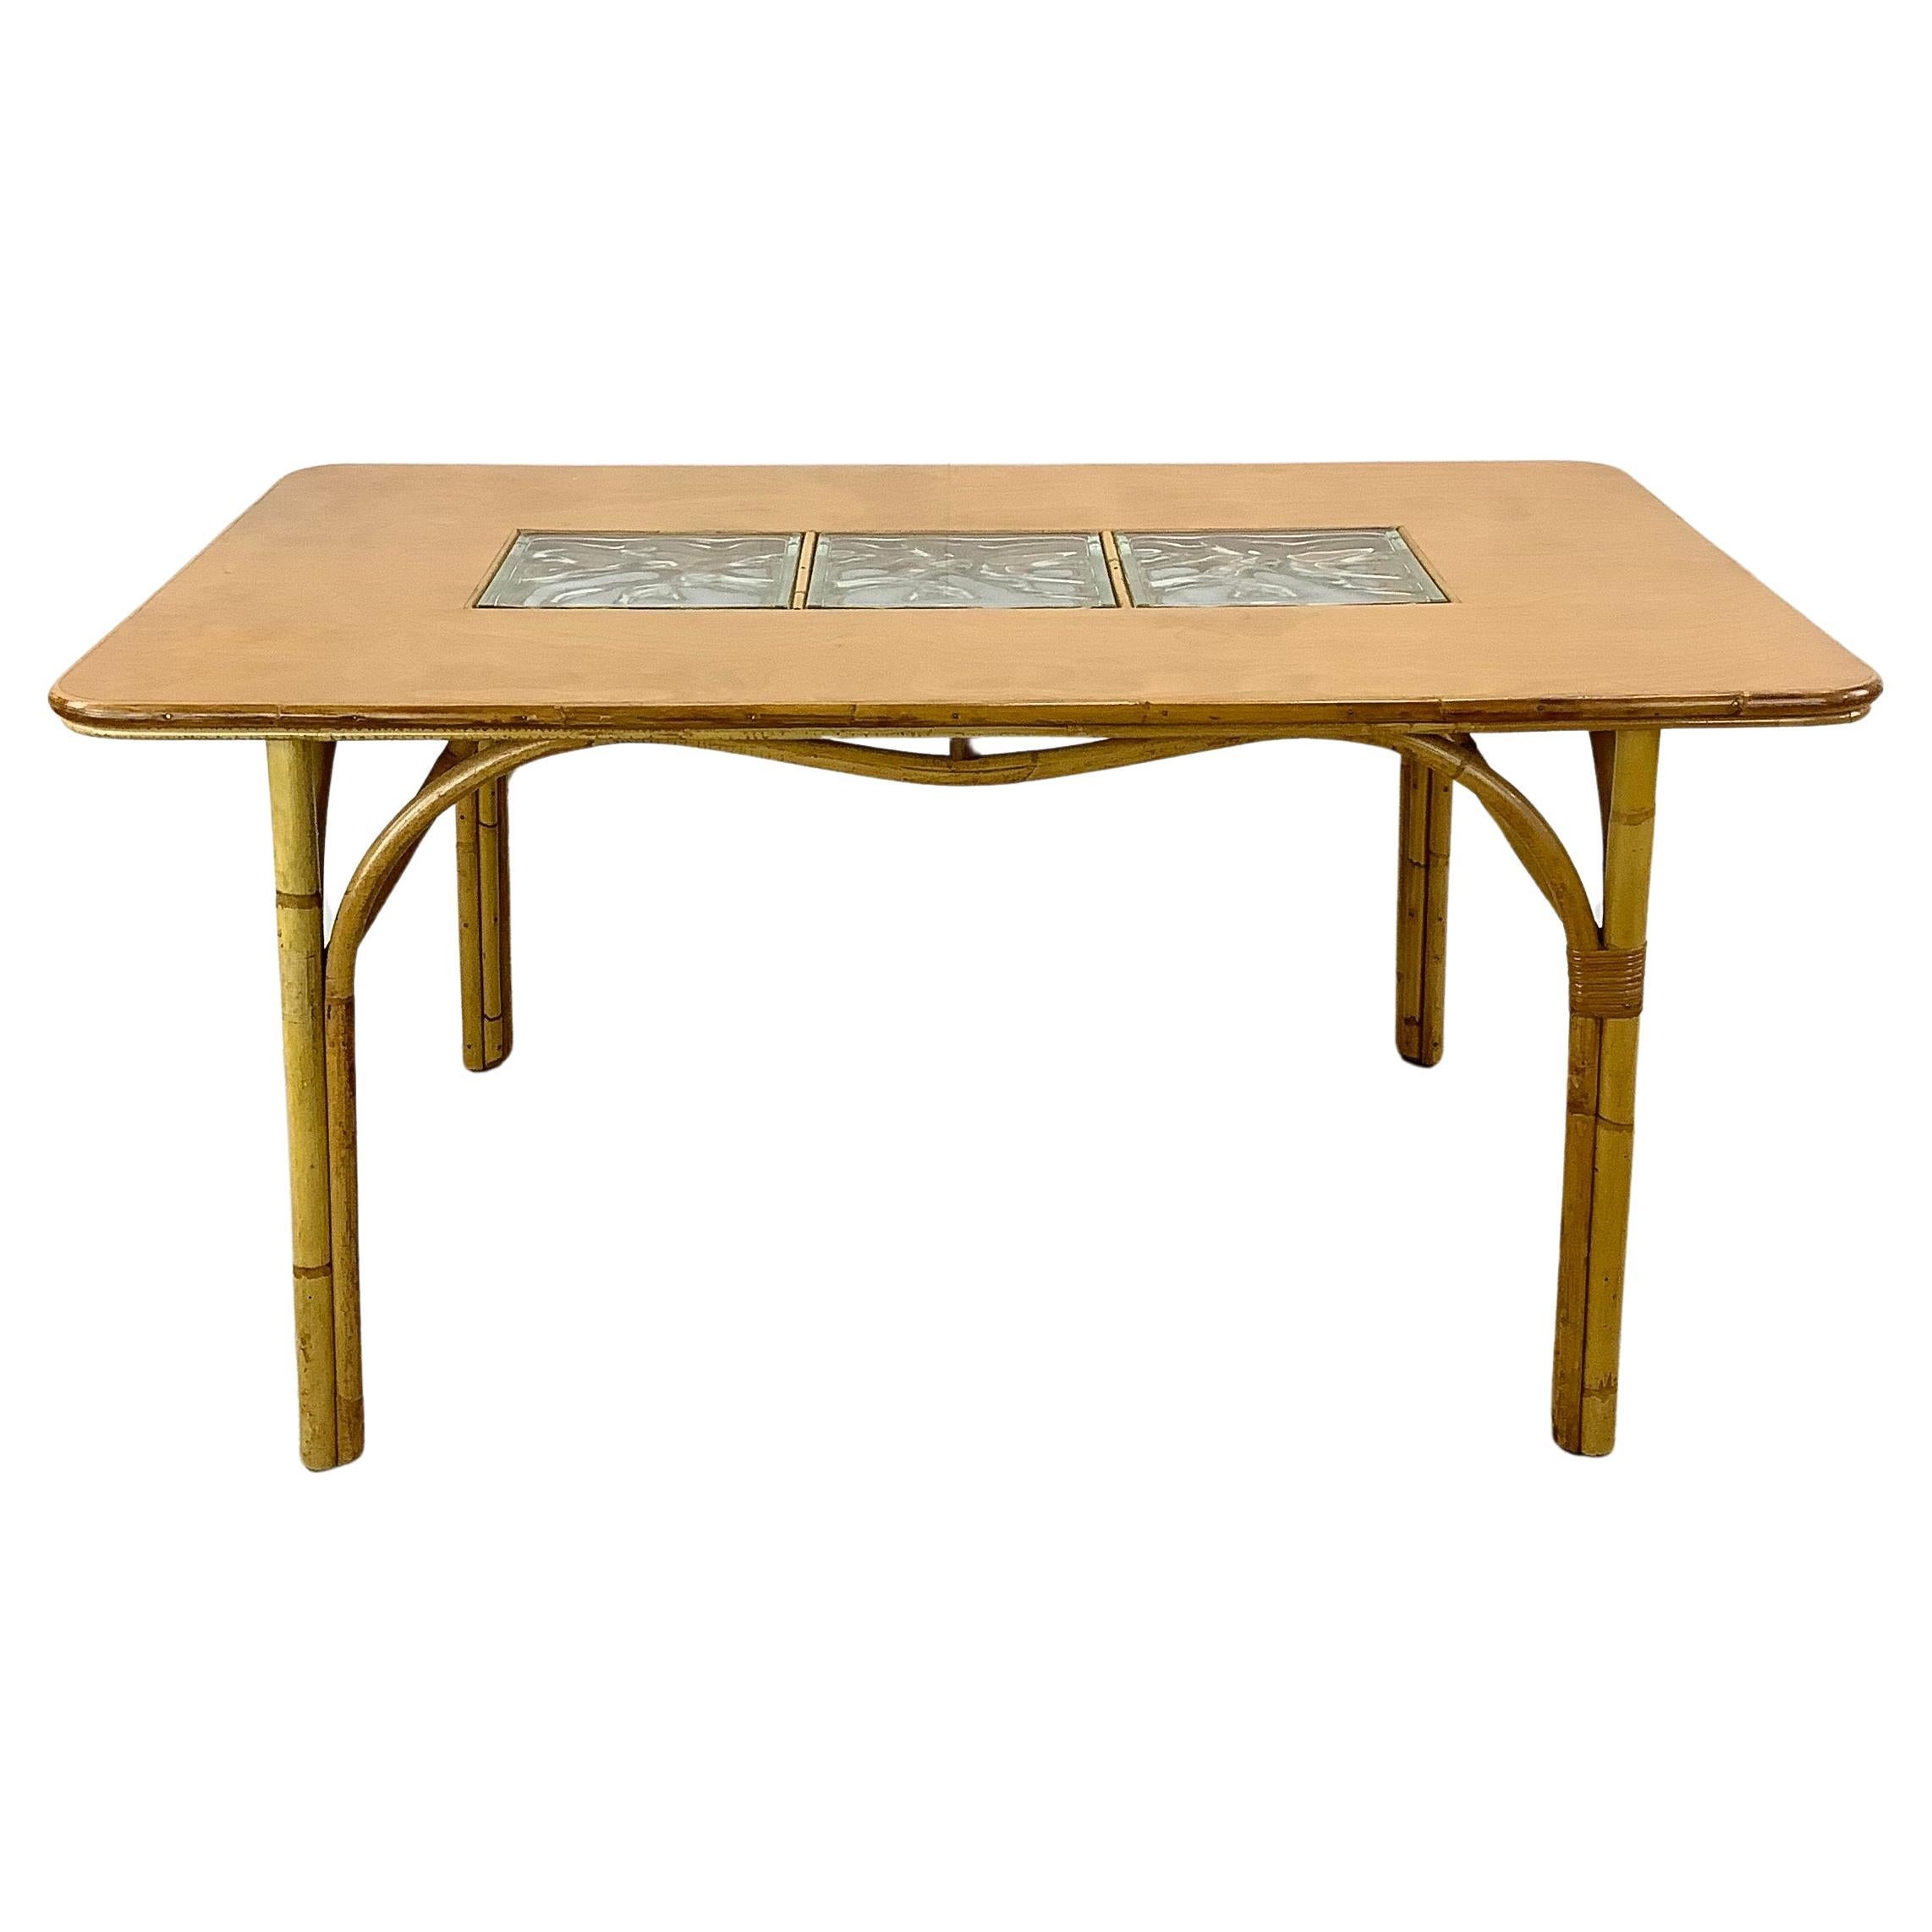 Vintage Modern Bamboo Dining Table With Glass Inserts For Sale